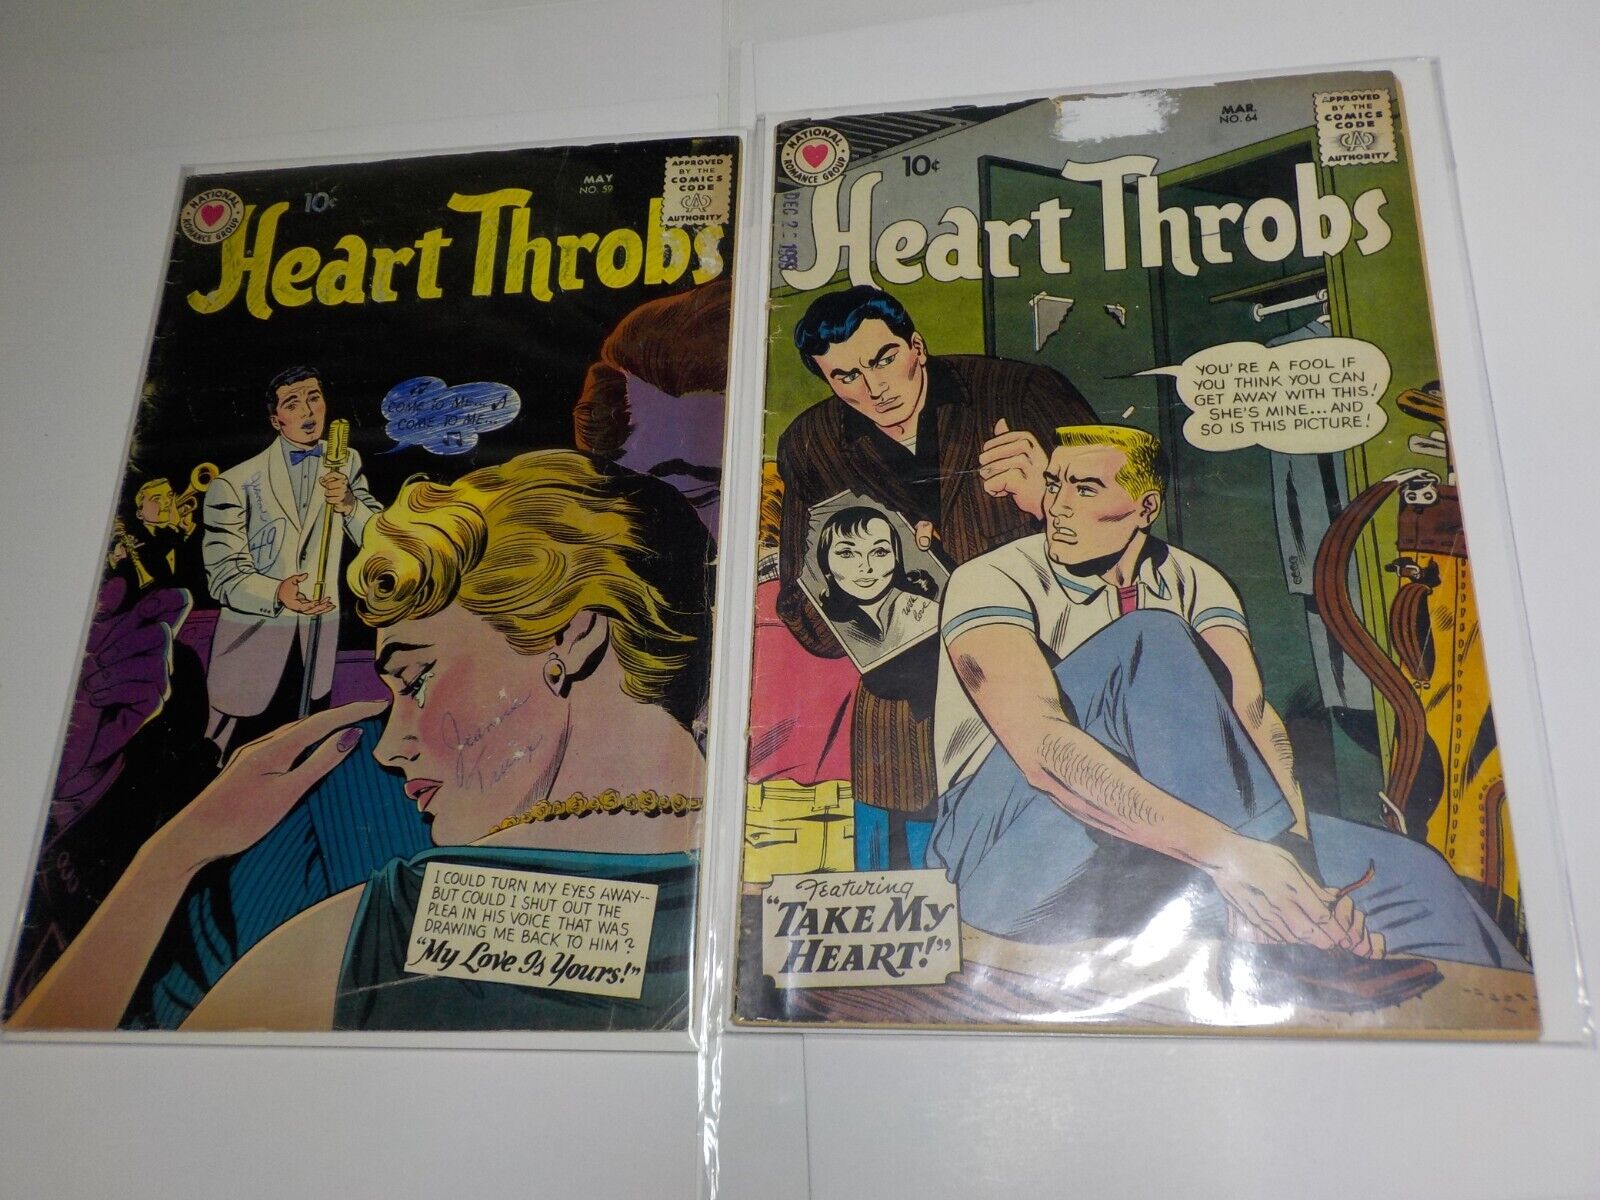 HEART THROBS #59 + #64 EARLY DC SILVER AGE ROMANCE (1959) LOT OF 2 COMICS